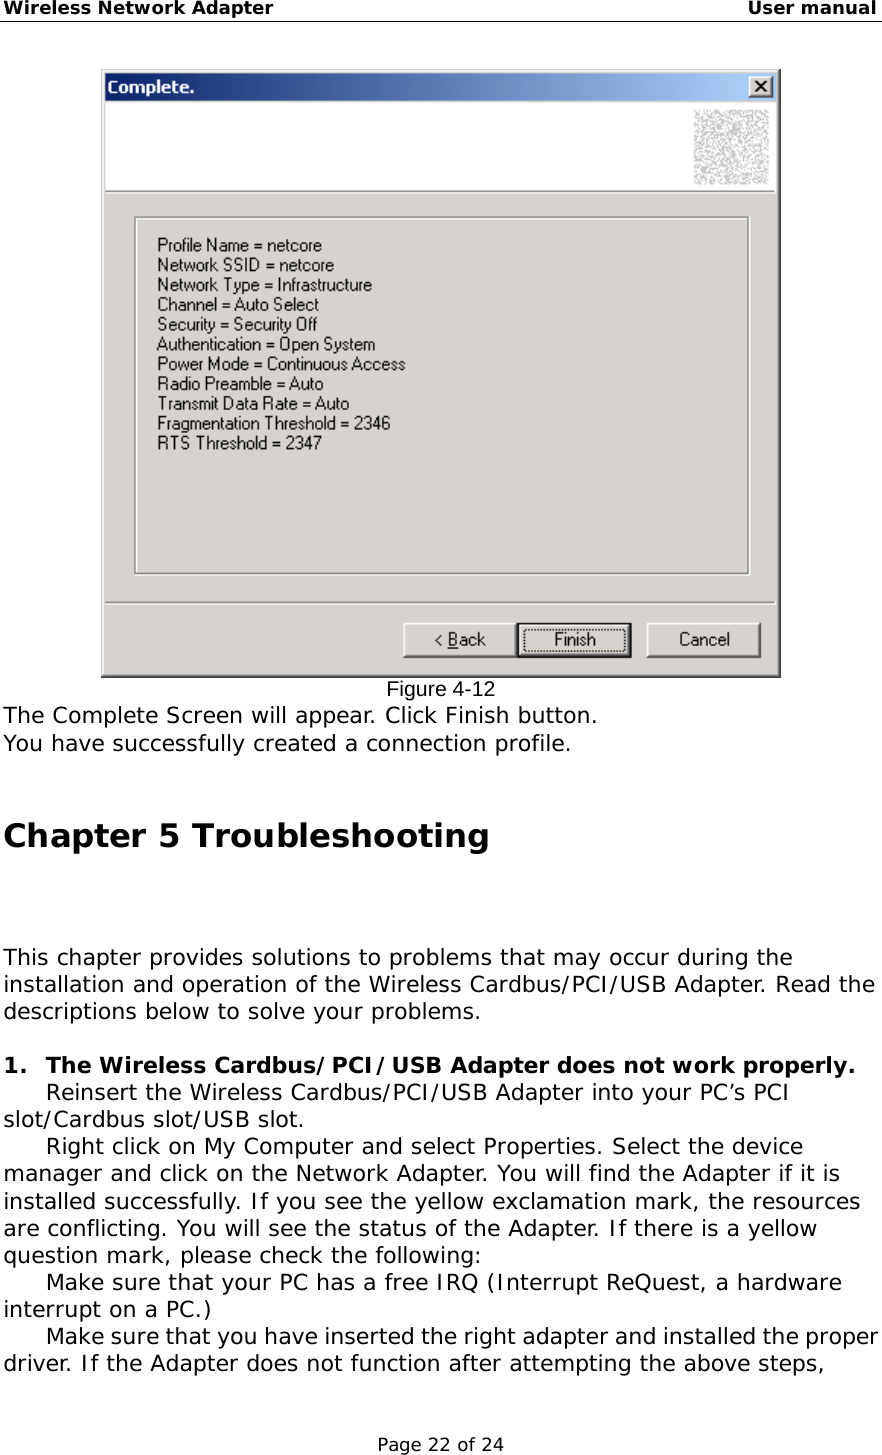 Wireless Network Adapter                                                    User manual Page 22 of 24  Figure 4-12 The Complete Screen will appear. Click Finish button.  You have successfully created a connection profile.  Chapter 5 Troubleshooting This chapter provides solutions to problems that may occur during the installation and operation of the Wireless Cardbus/PCI/USB Adapter. Read the descriptions below to solve your problems.   1.  The Wireless Cardbus/PCI/USB Adapter does not work properly. 　  Reinsert the Wireless Cardbus/PCI/USB Adapter into your PC’s PCI slot/Cardbus slot/USB slot. 　  Right click on My Computer and select Properties. Select the device manager and click on the Network Adapter. You will find the Adapter if it is installed successfully. If you see the yellow exclamation mark, the resources are conflicting. You will see the status of the Adapter. If there is a yellow question mark, please check the following: 　  Make sure that your PC has a free IRQ (Interrupt ReQuest, a hardware interrupt on a PC.) 　  Make sure that you have inserted the right adapter and installed the proper driver. If the Adapter does not function after attempting the above steps, 